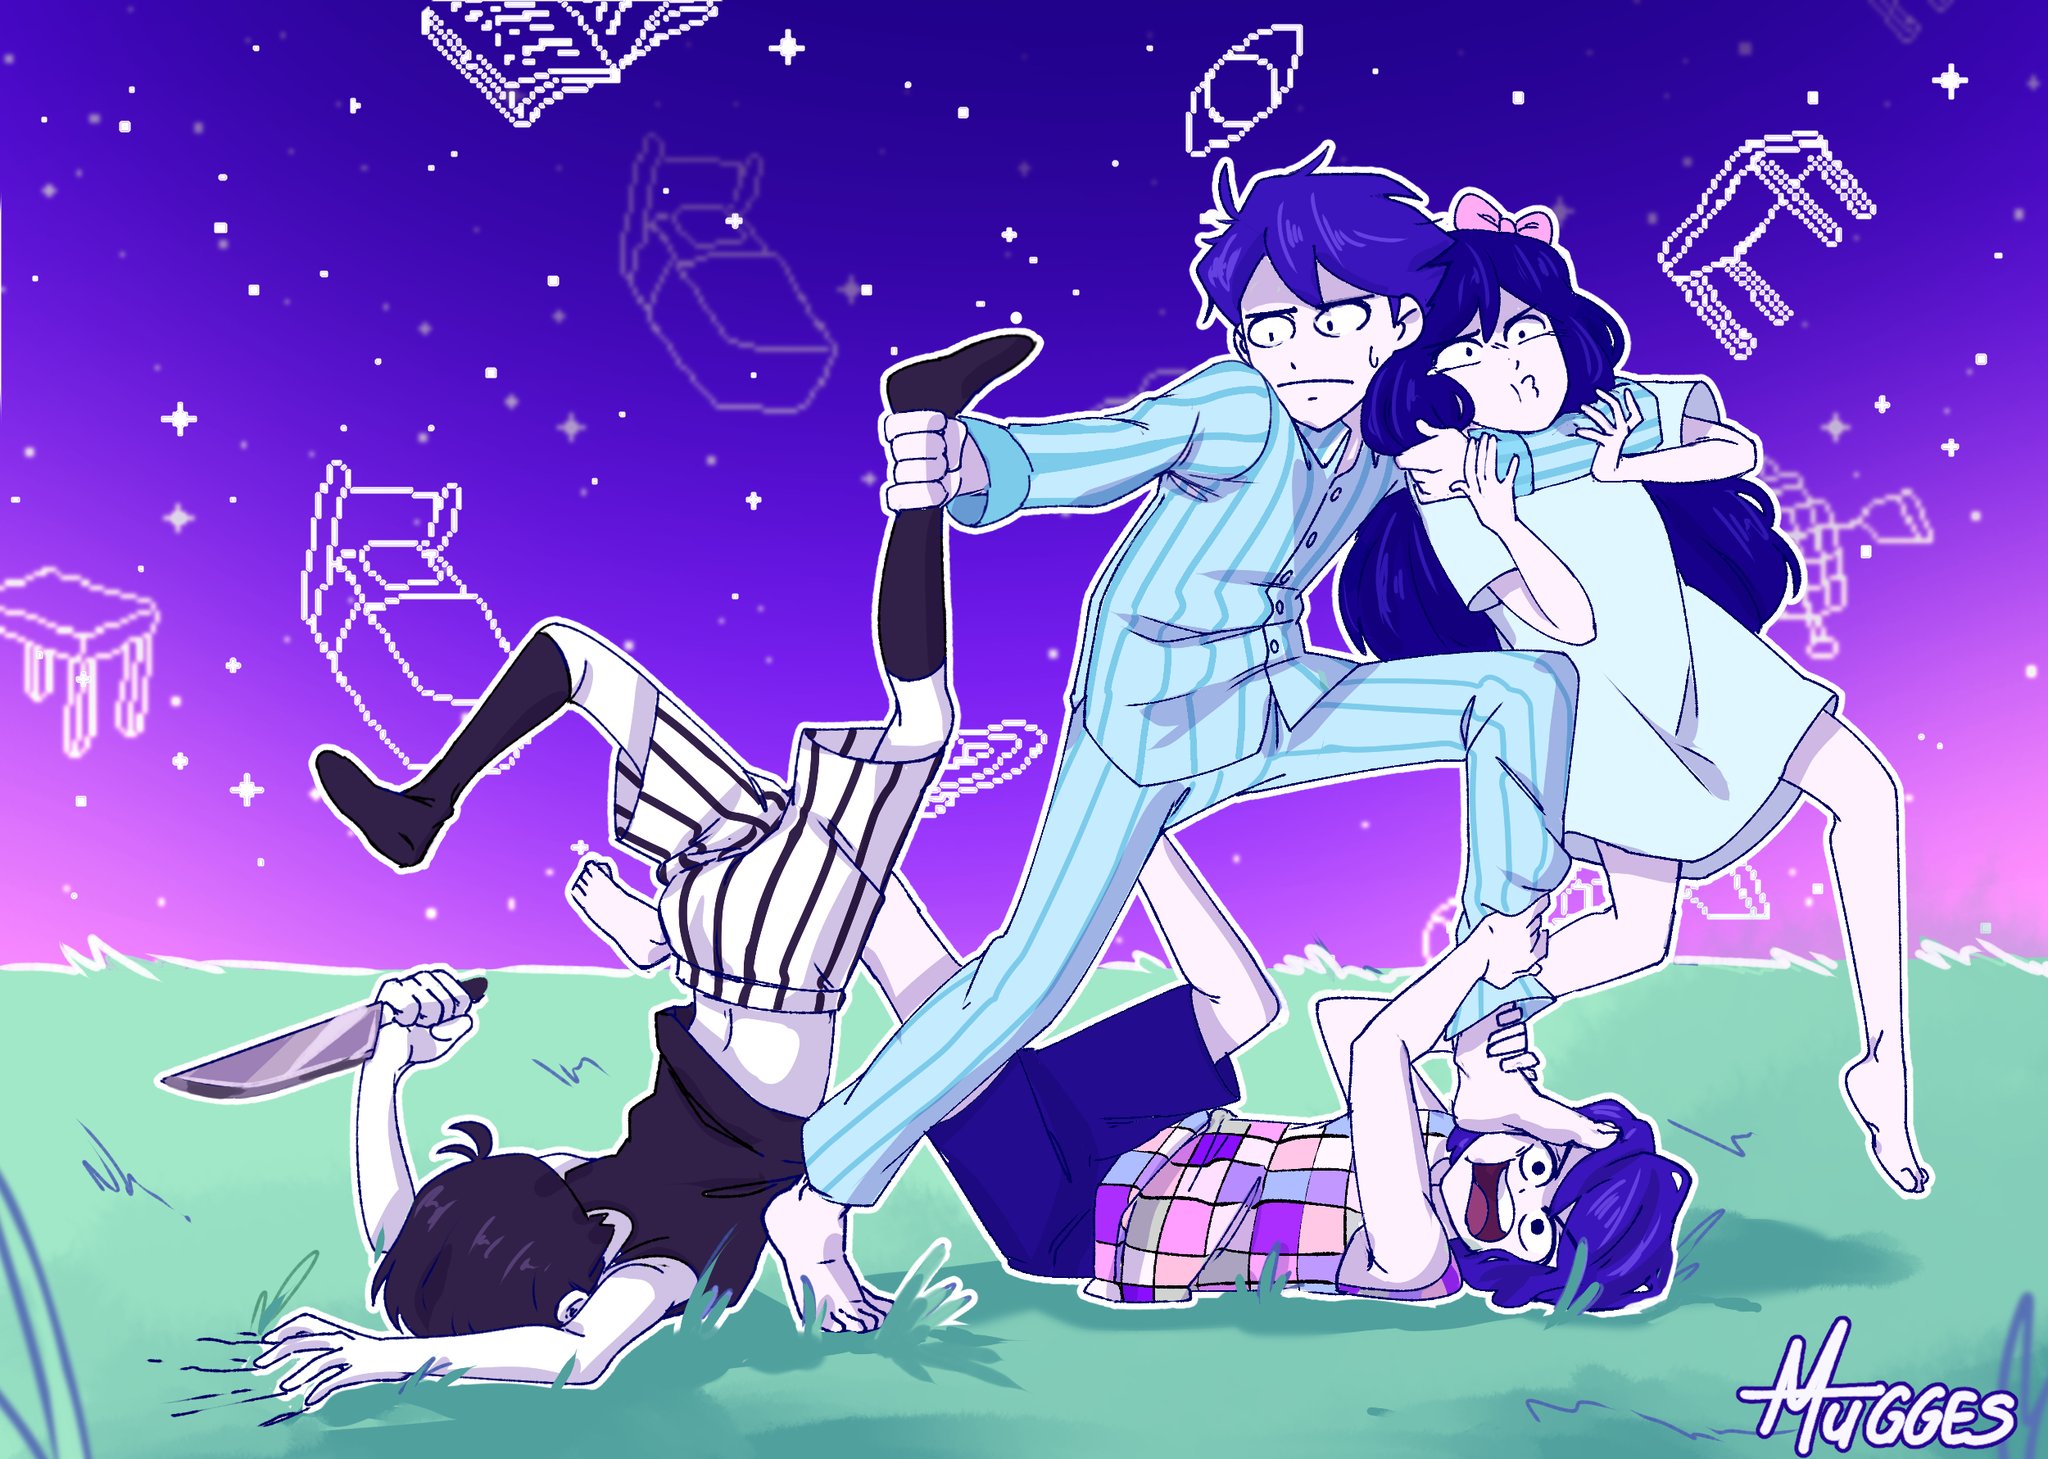 Download Explore the stunning and surreal world of Omori  Wallpaperscom